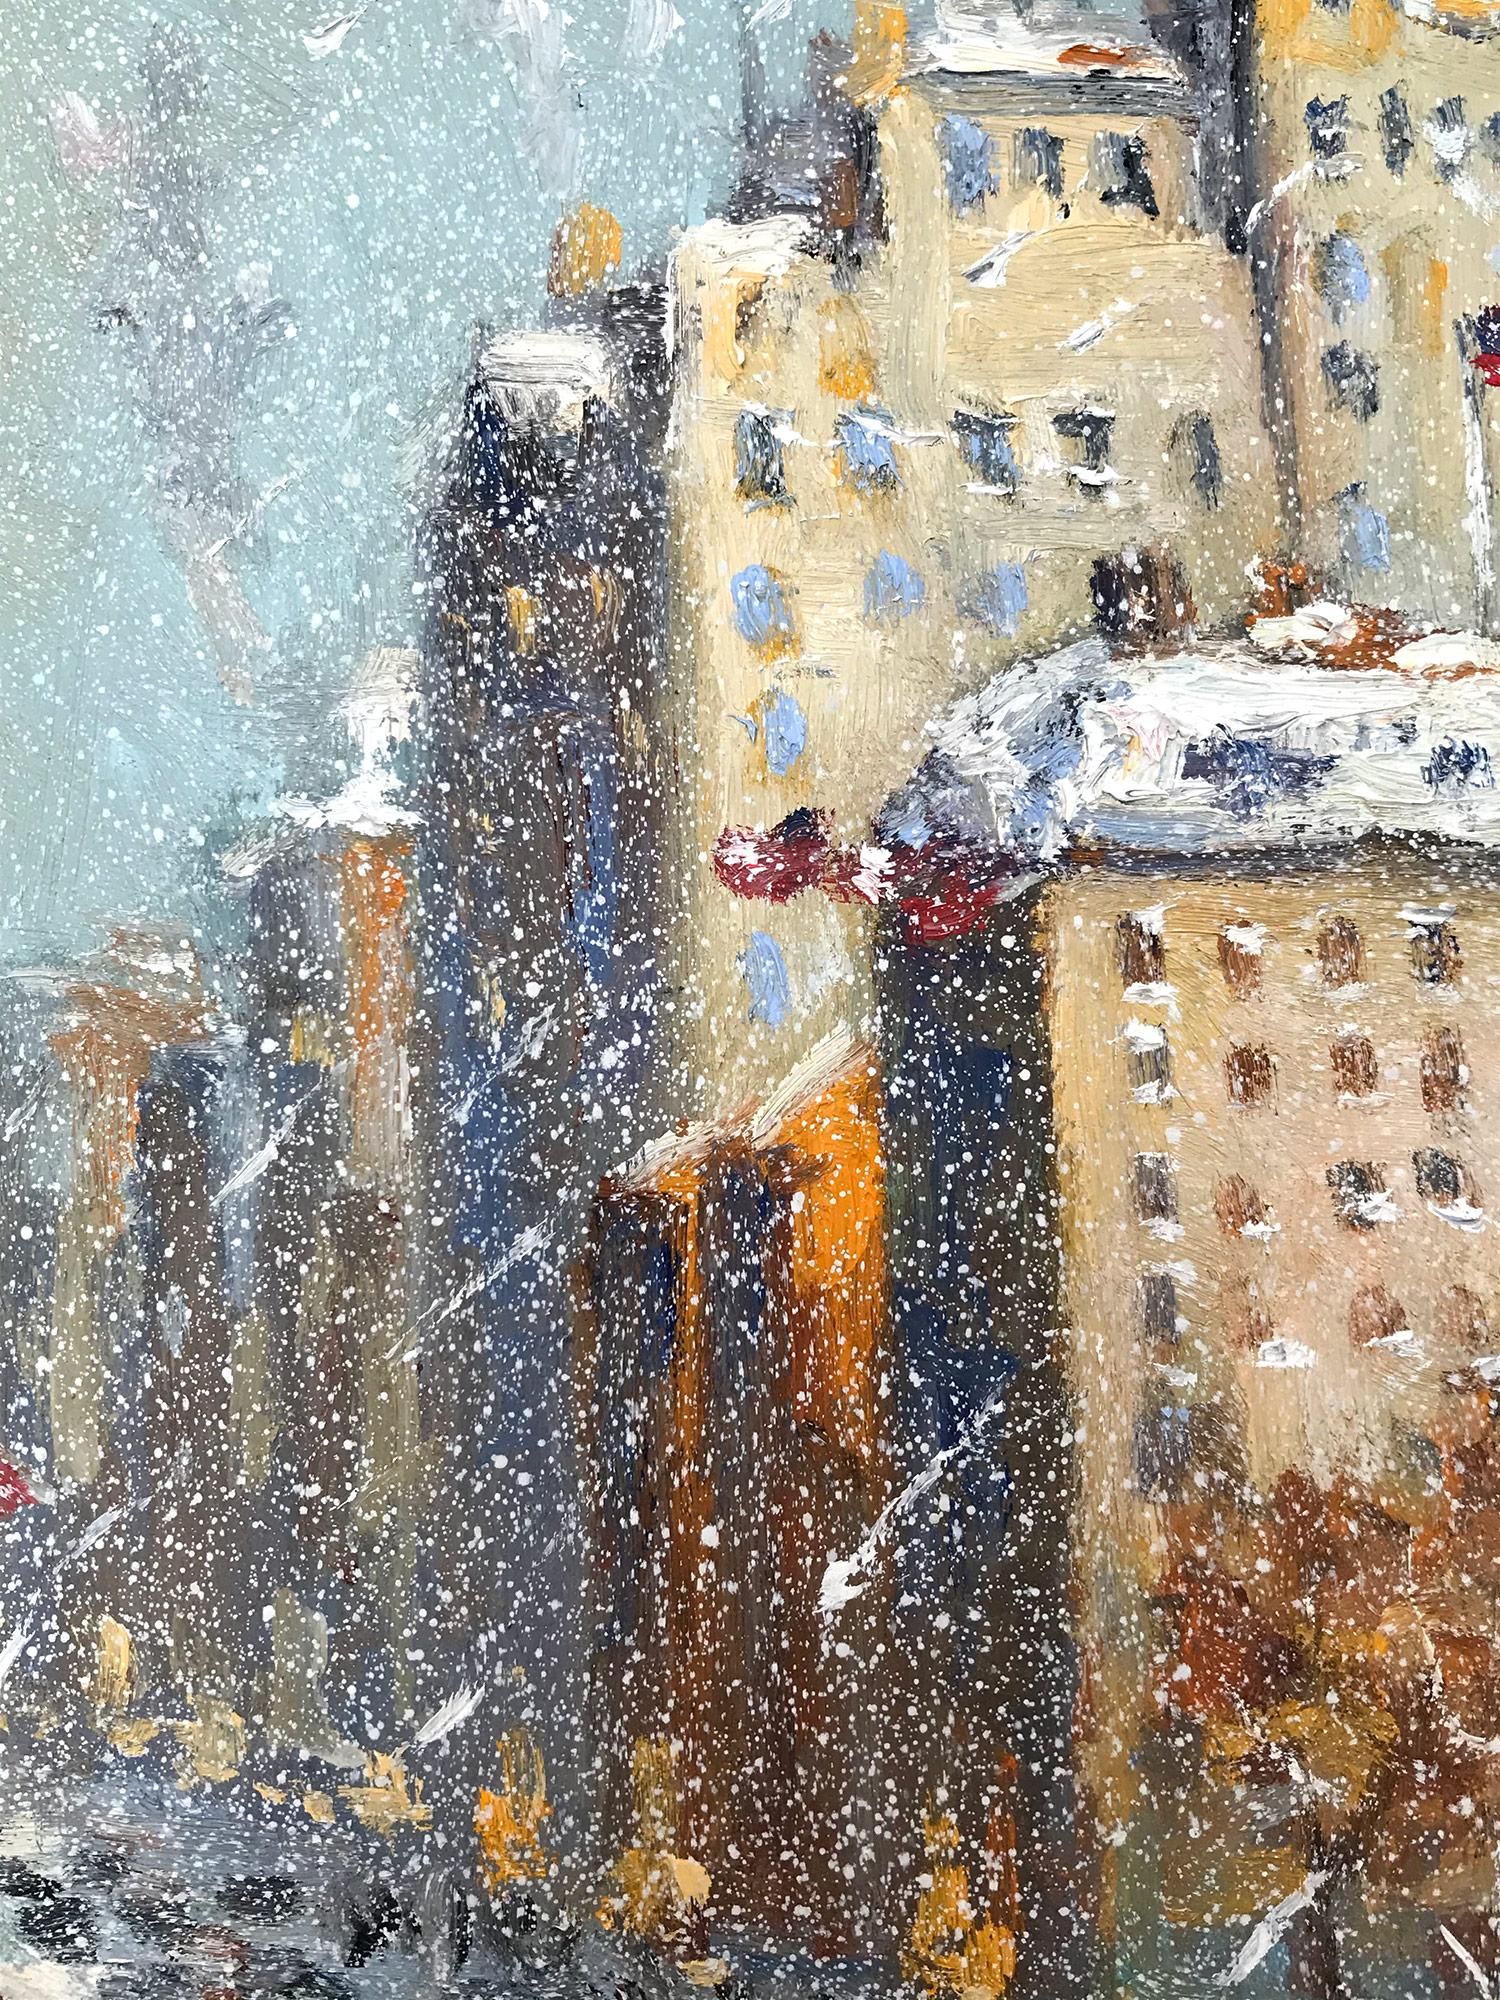 Impressionist New York City winter cityscene depicting the Library with American flags, cars and pedestrians off 5th Avenue in a most intimate, yet energetic way. Christopher is known for capturing the beauty and simplicity of an earlier time of the